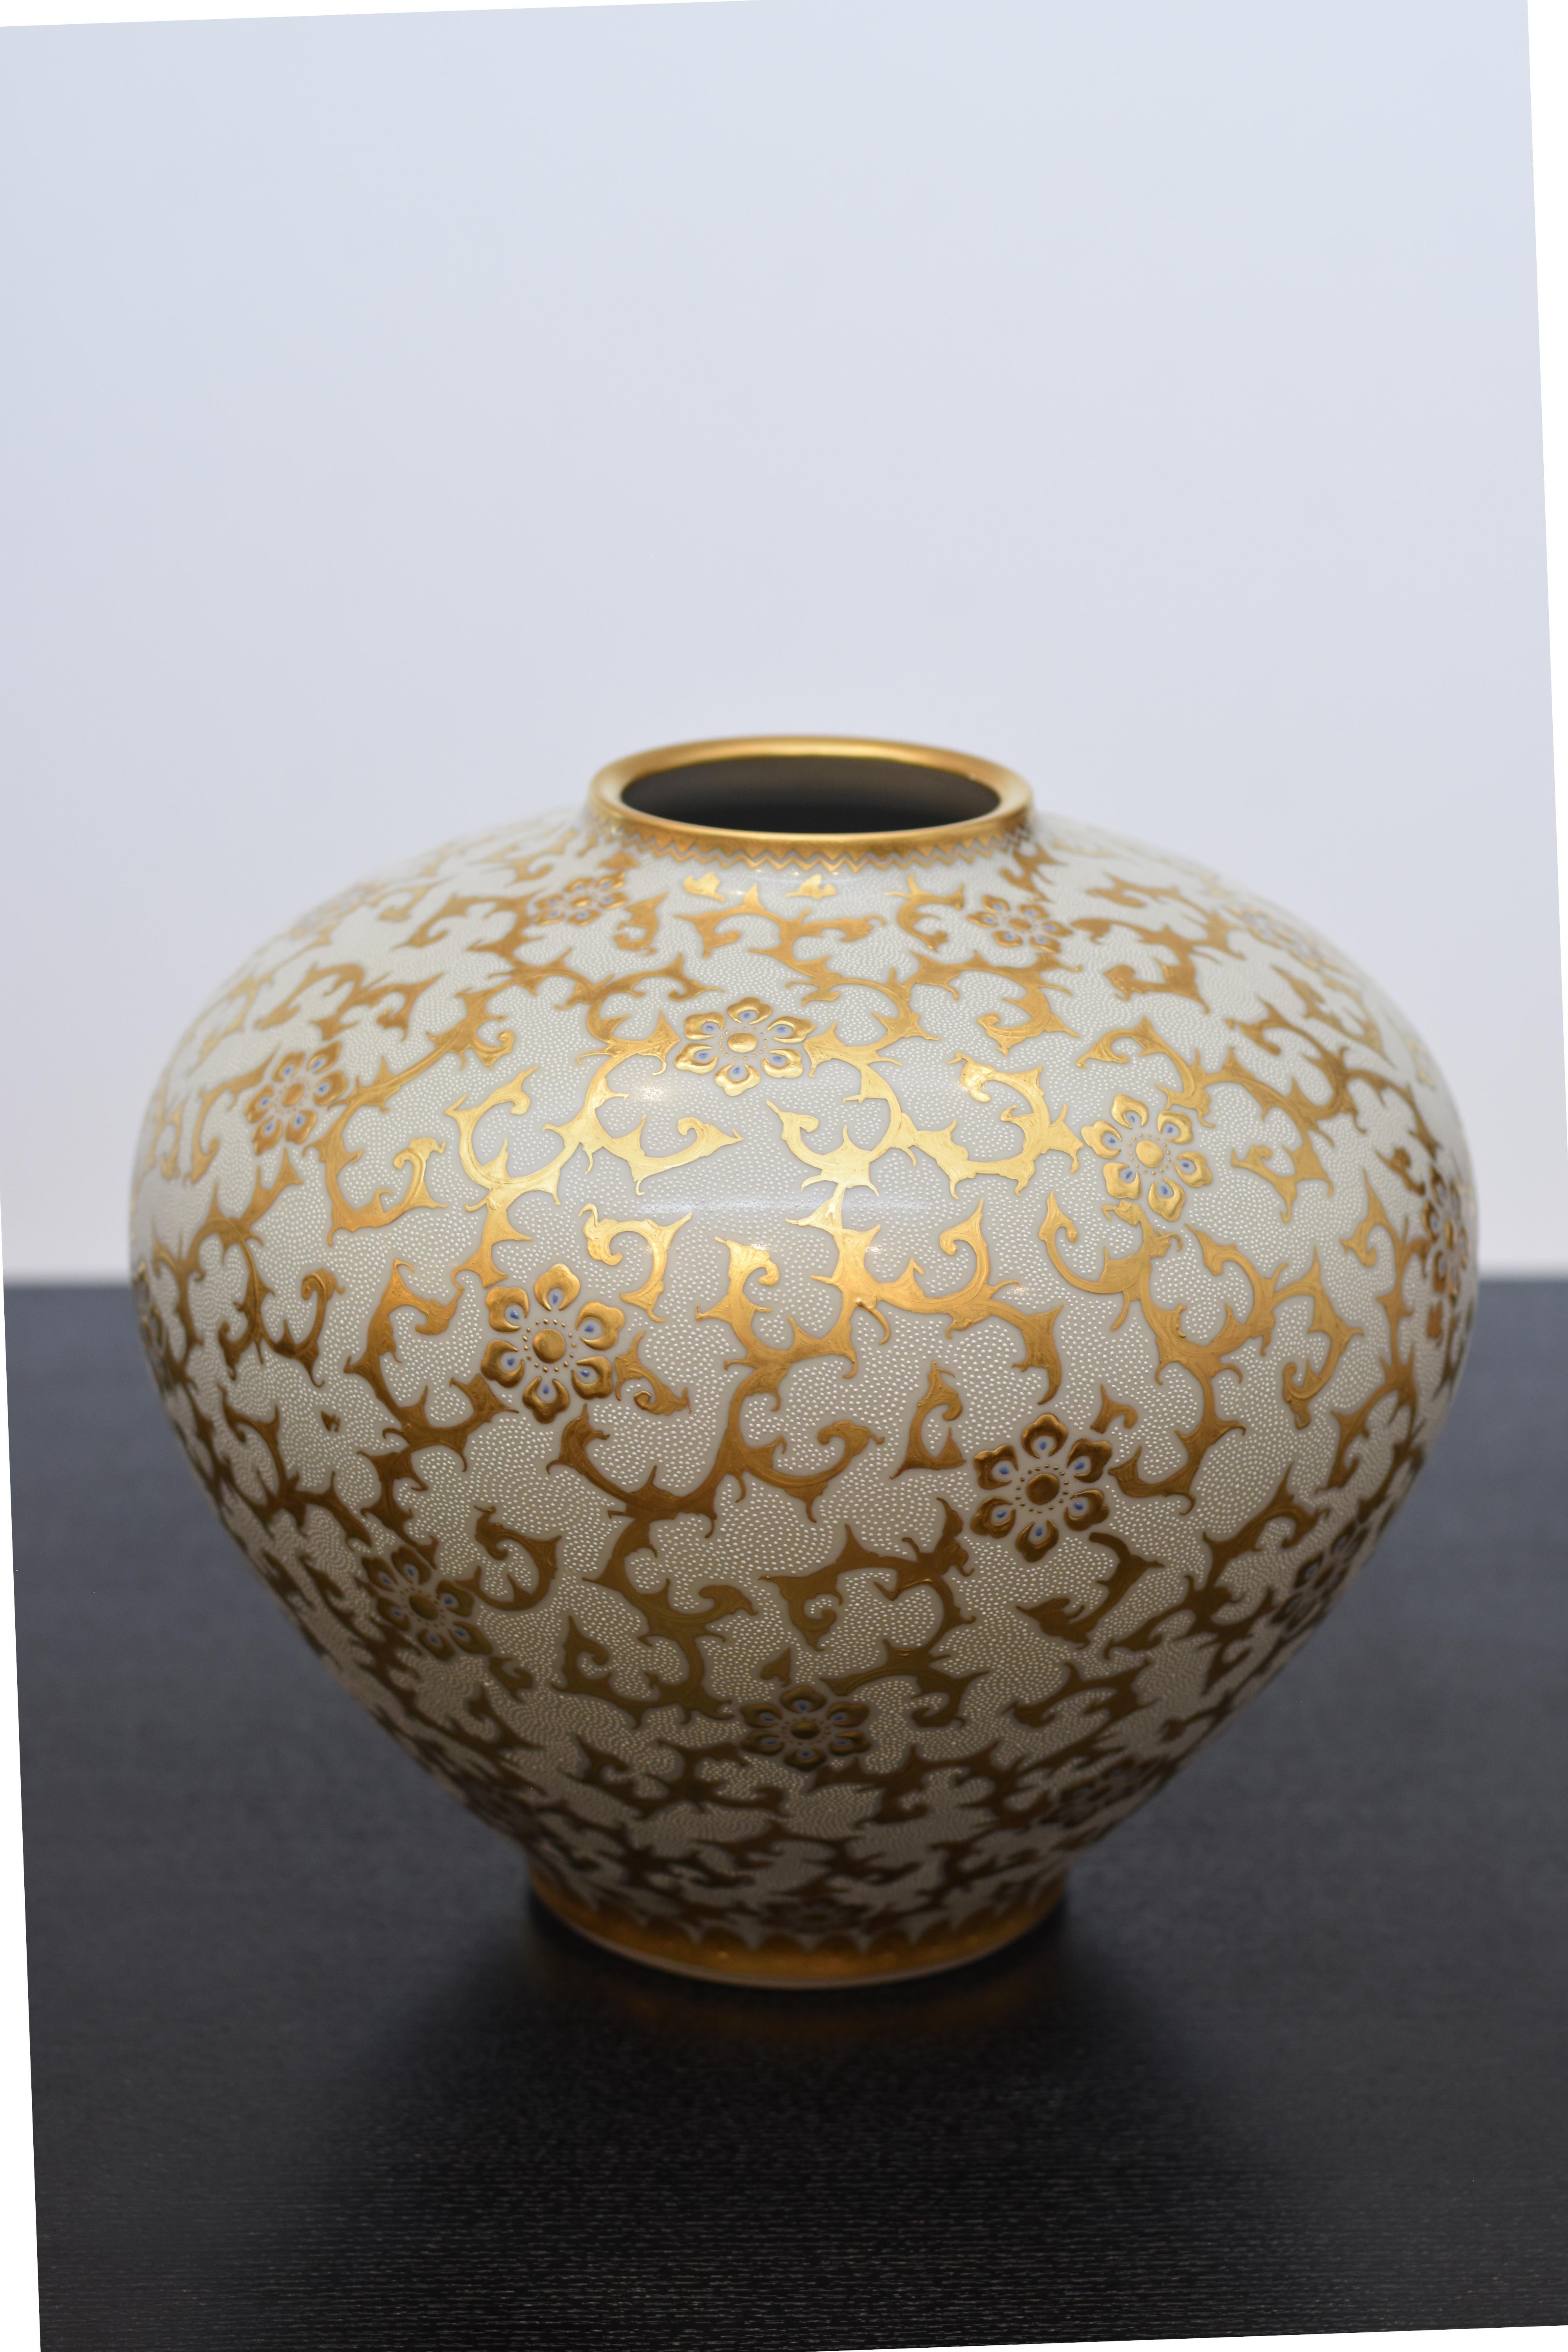 Meiji Contemporary Japanese White Pure Gold Porcelain Vase by Master Artist, 2 For Sale